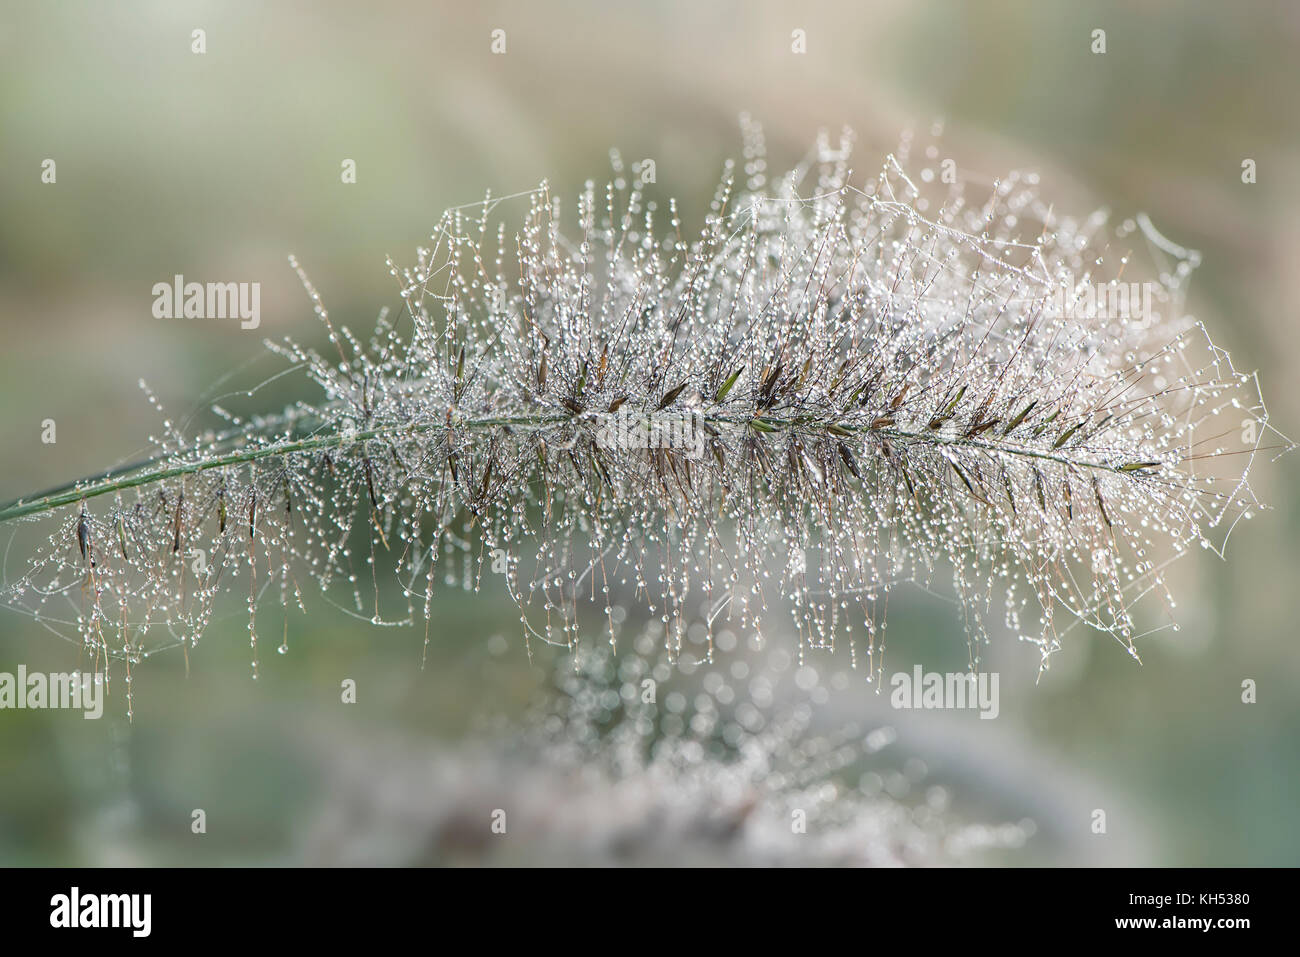 Close-up image of Crimson Fountain Grass also known as Pennisetum setaceum, image taken early morning with dew drops on the grass Stock Photo